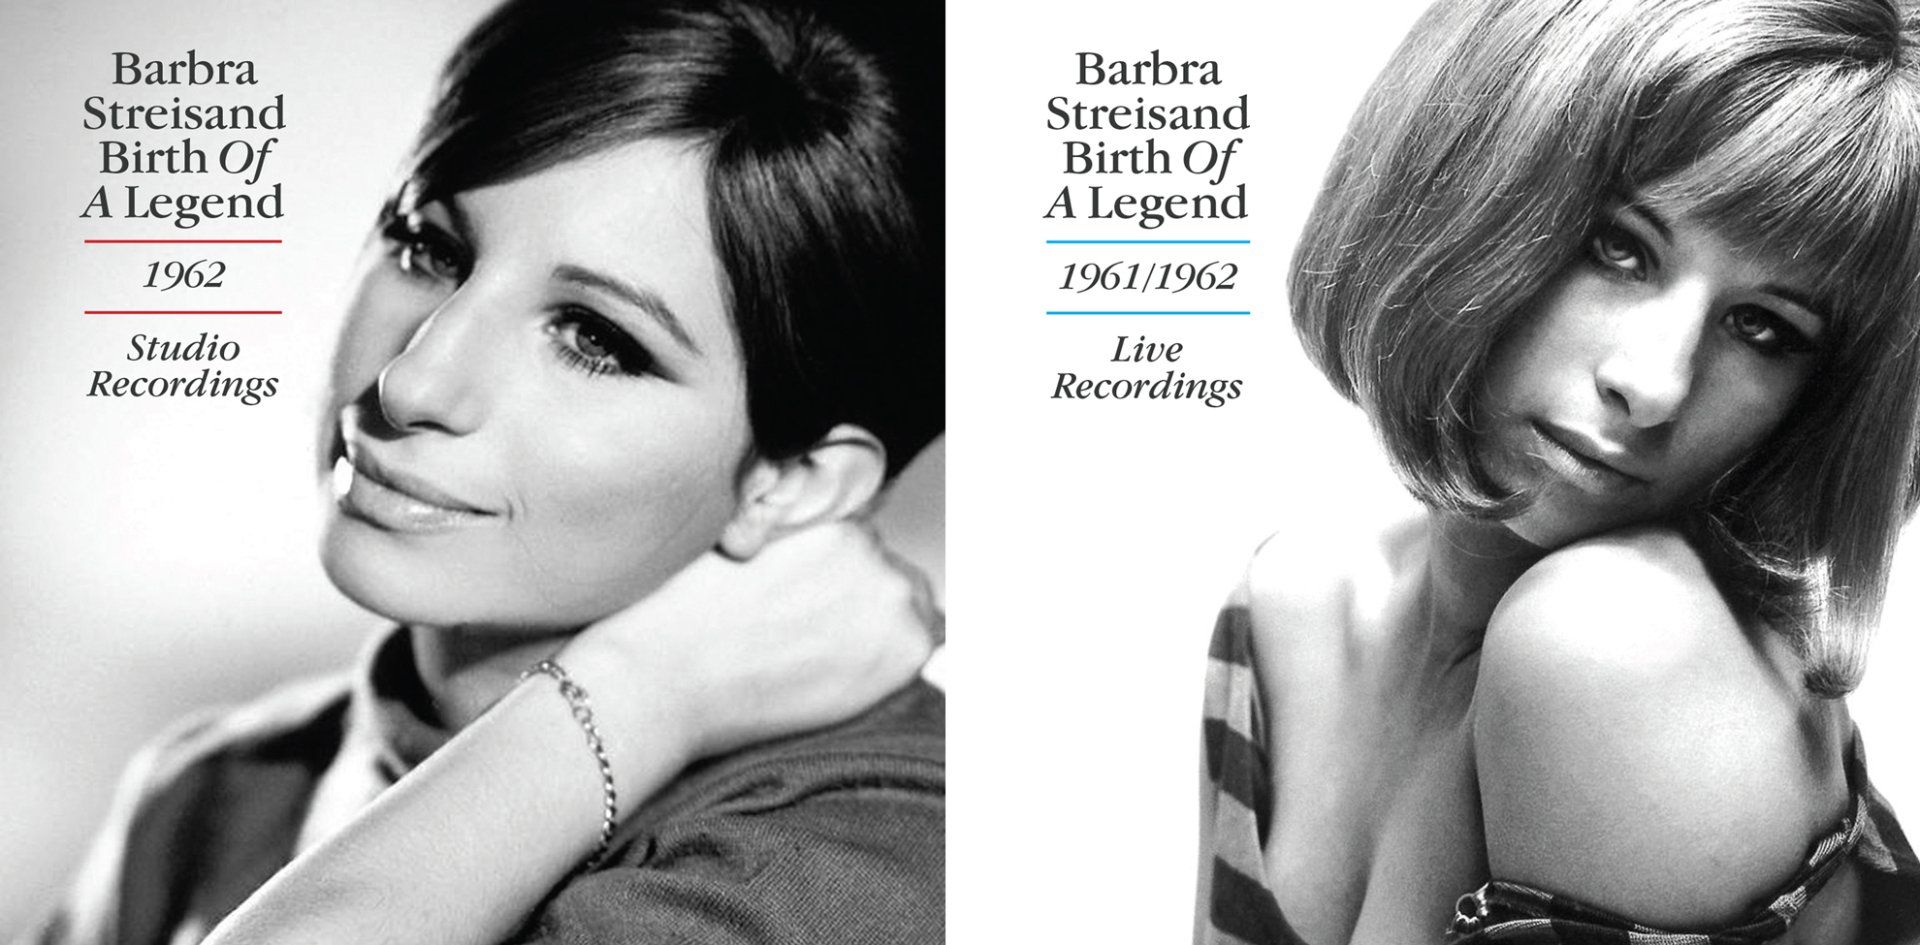 Birth of a Legend CD covers